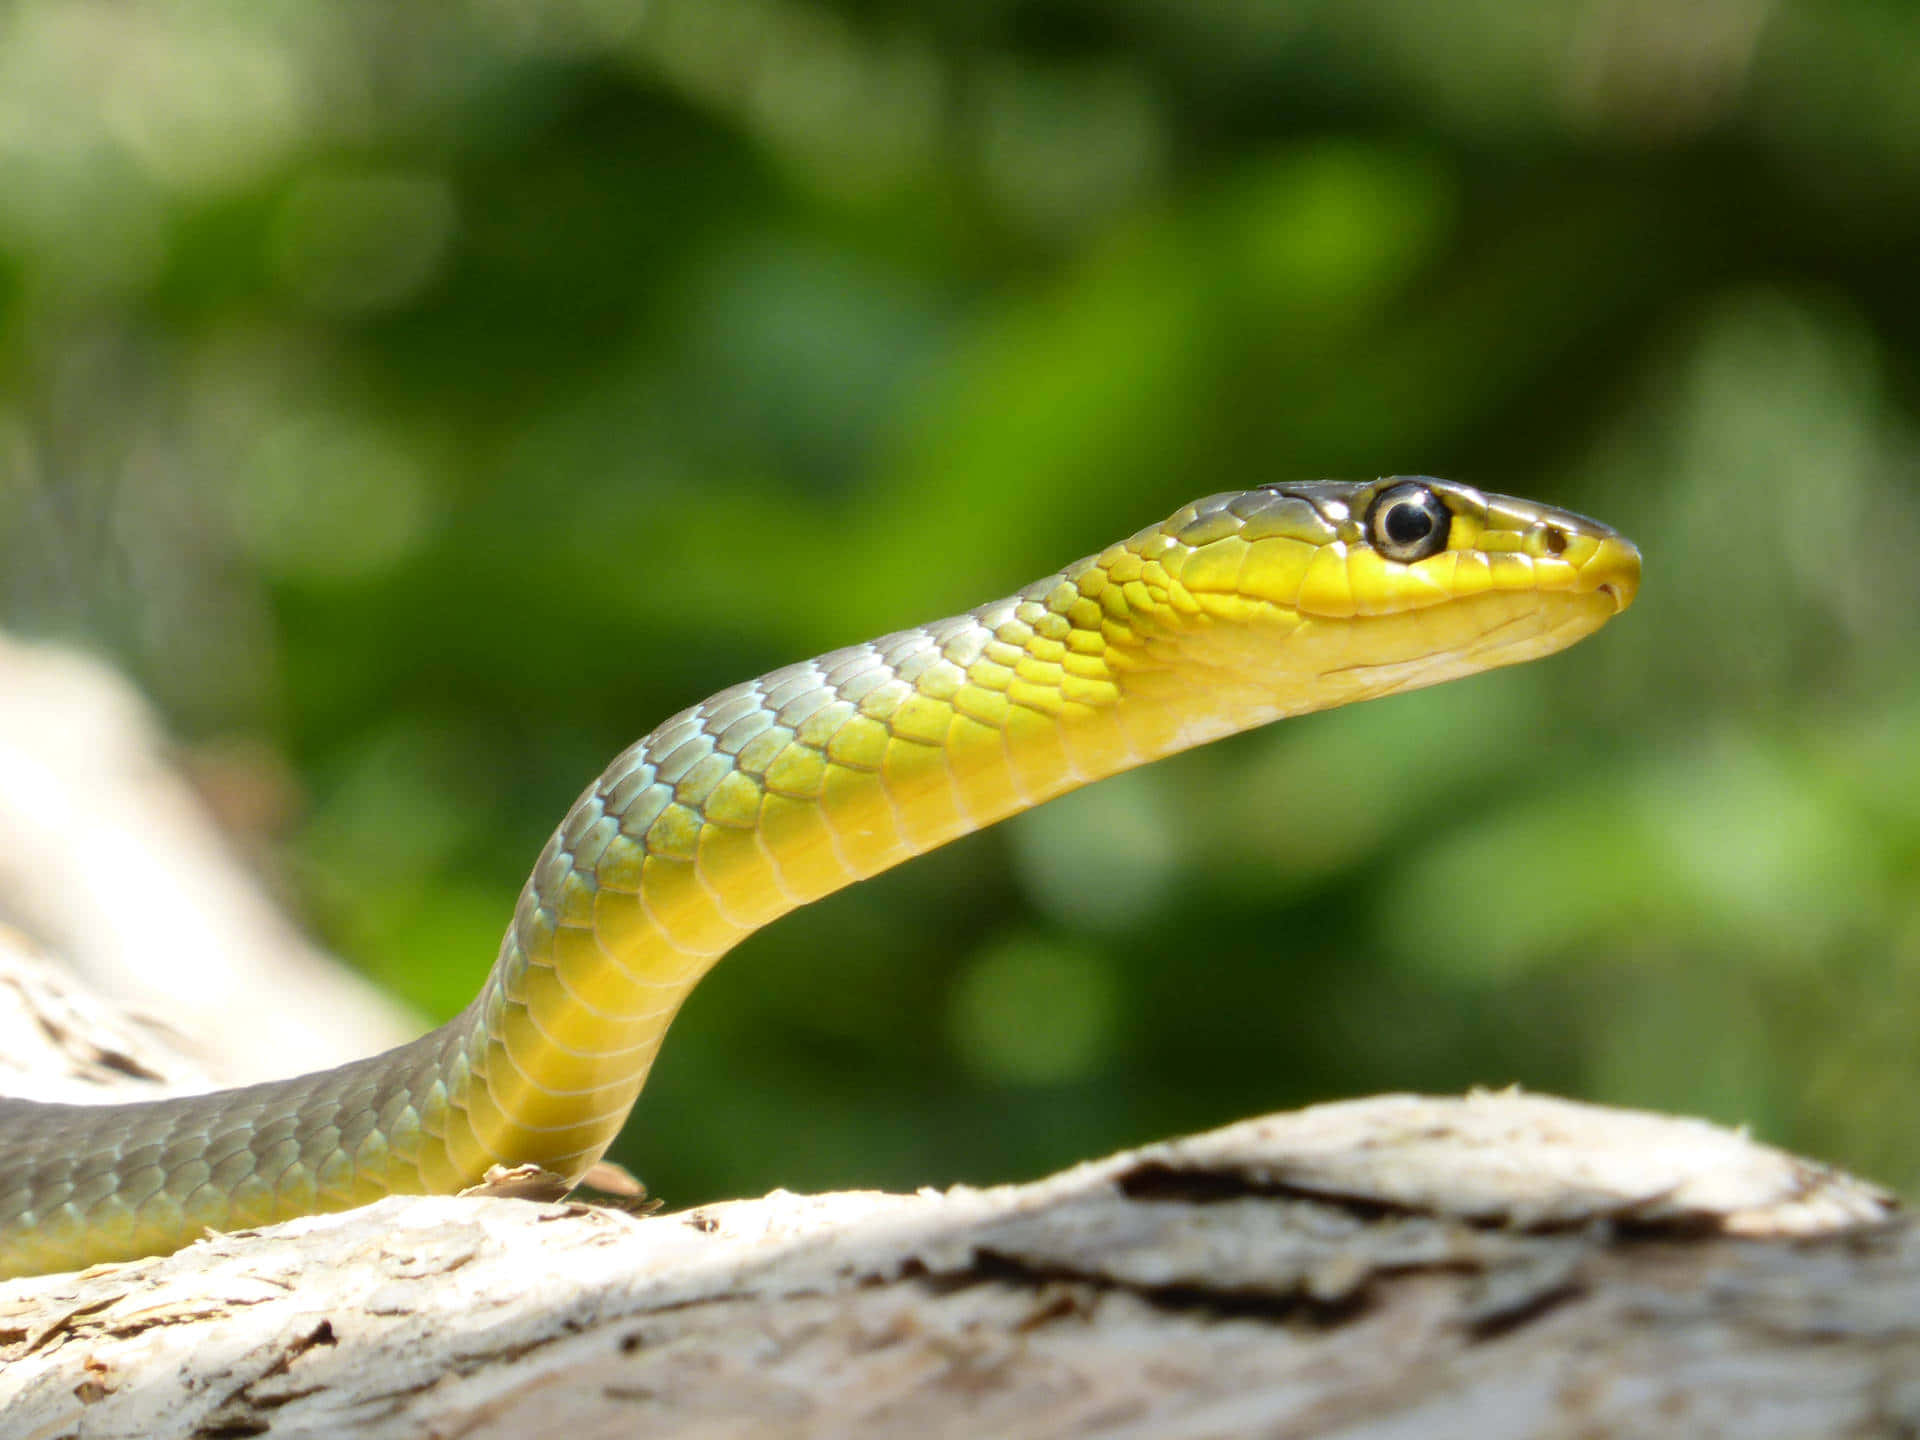 Stunning Yellow Snake Slithering Through Branches Wallpaper